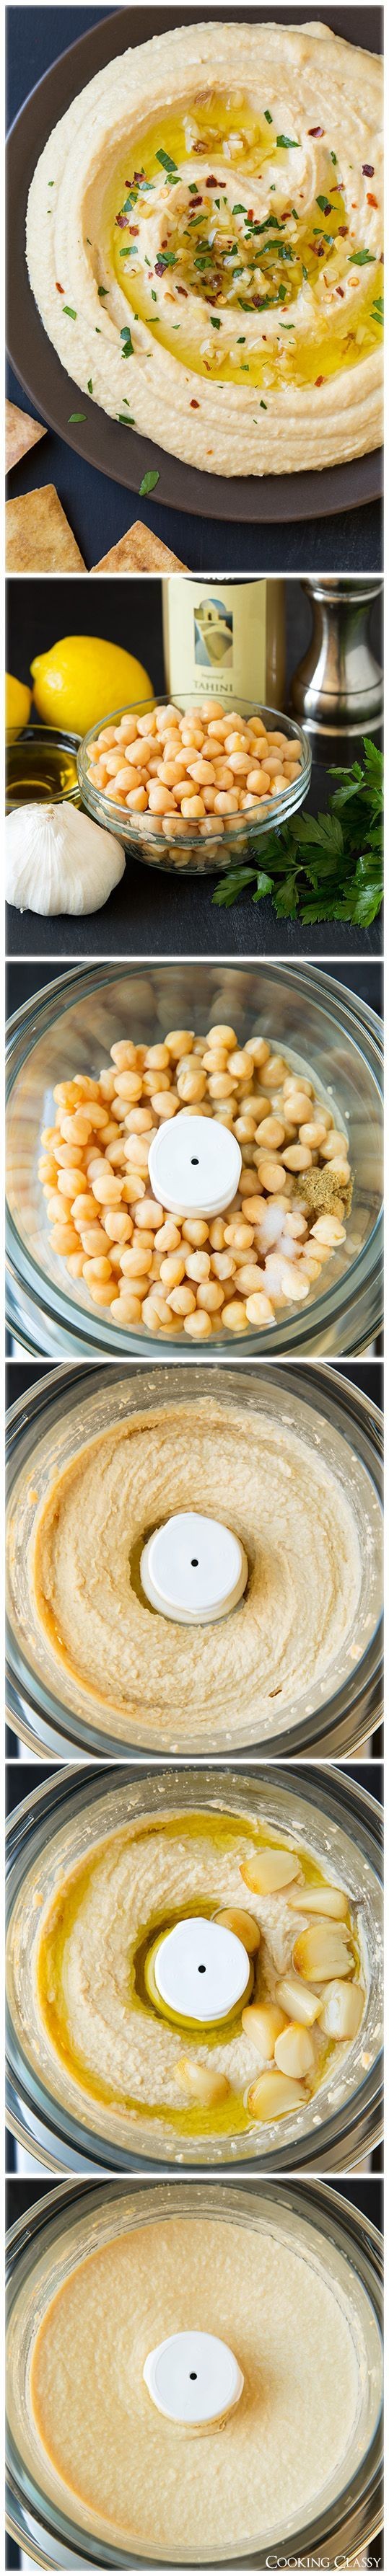 Roasted Garlic Hummus - This is unbelievably delic...